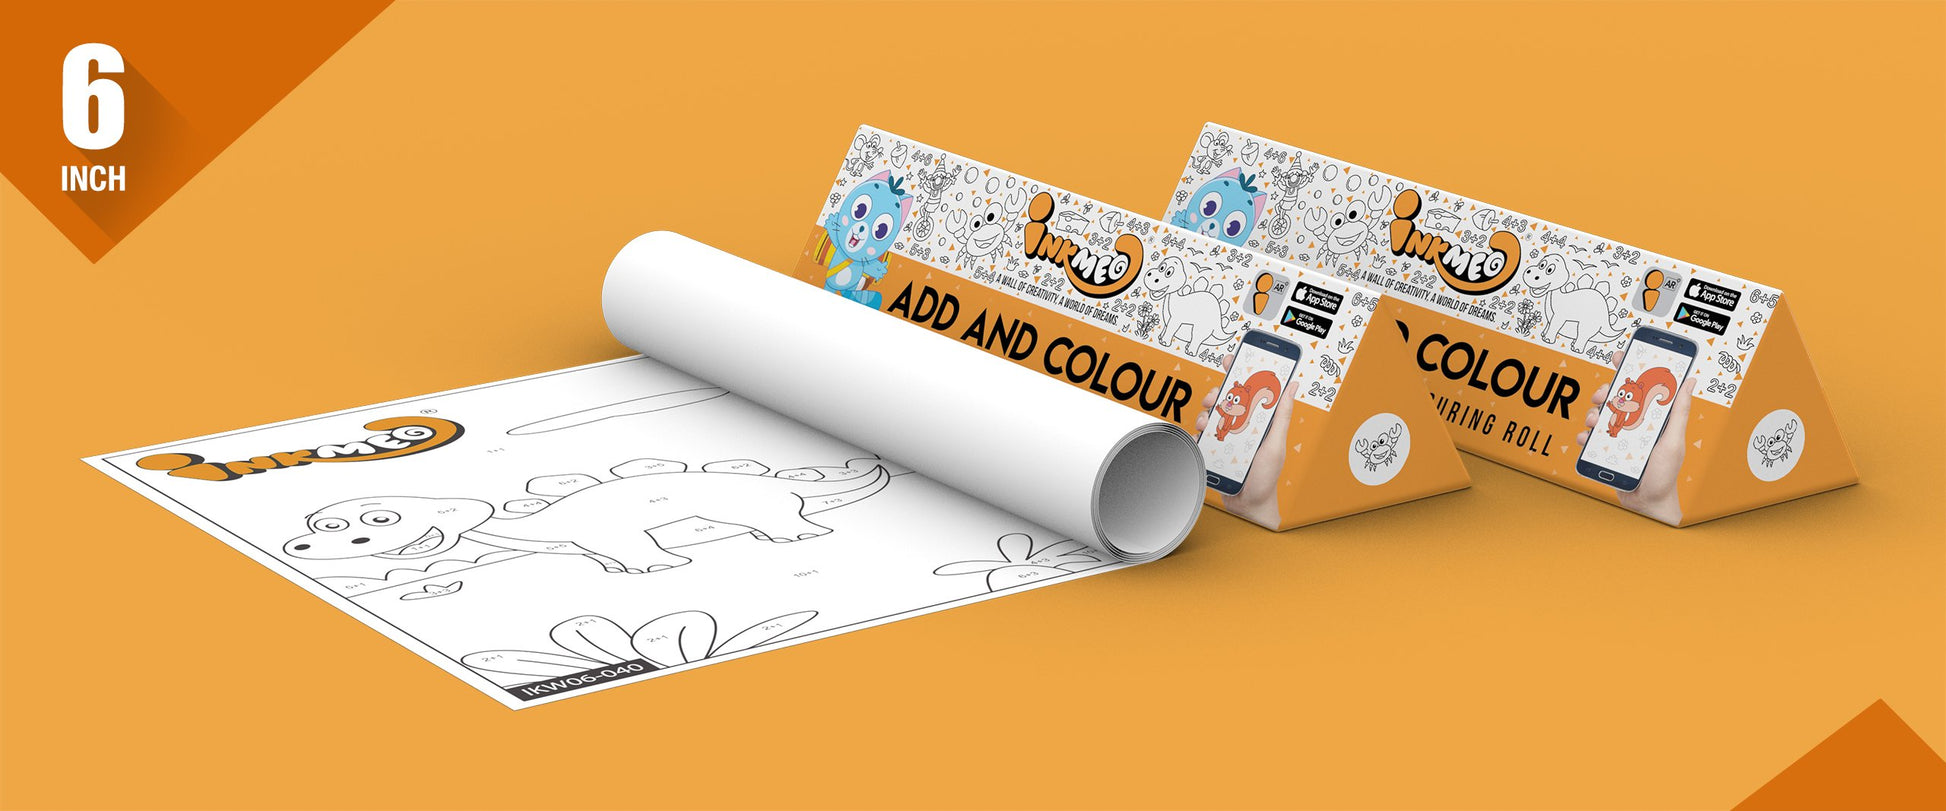 The image depicts two 6*40-inches orange triangular add and colour boxes placed alongside each other, with a sheet rolled out next to them.